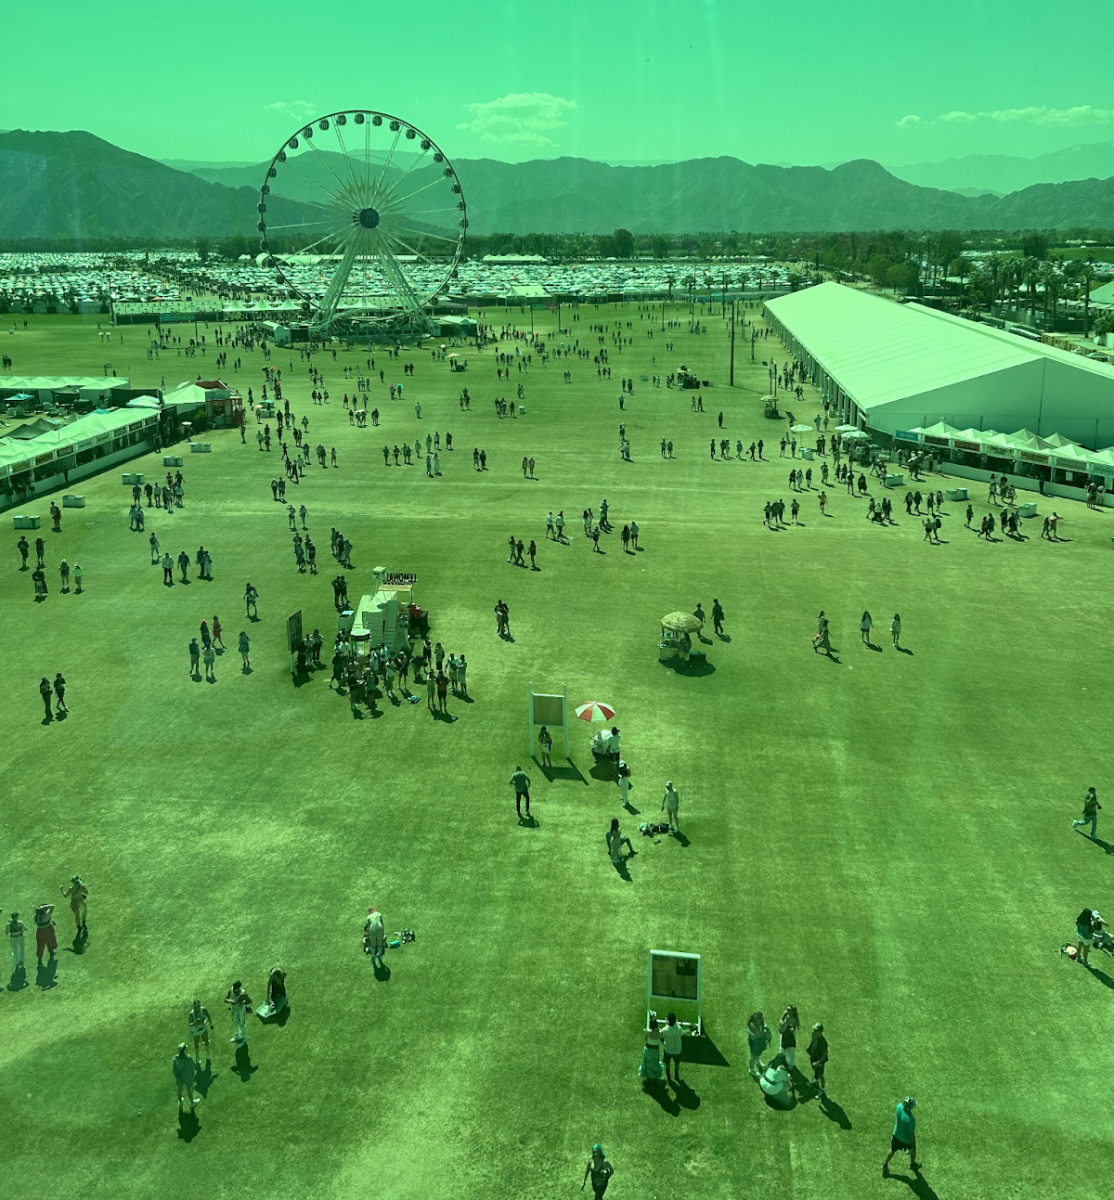 Coachella-goers as seen through the lens of the Rainbow Tower, April 20.
